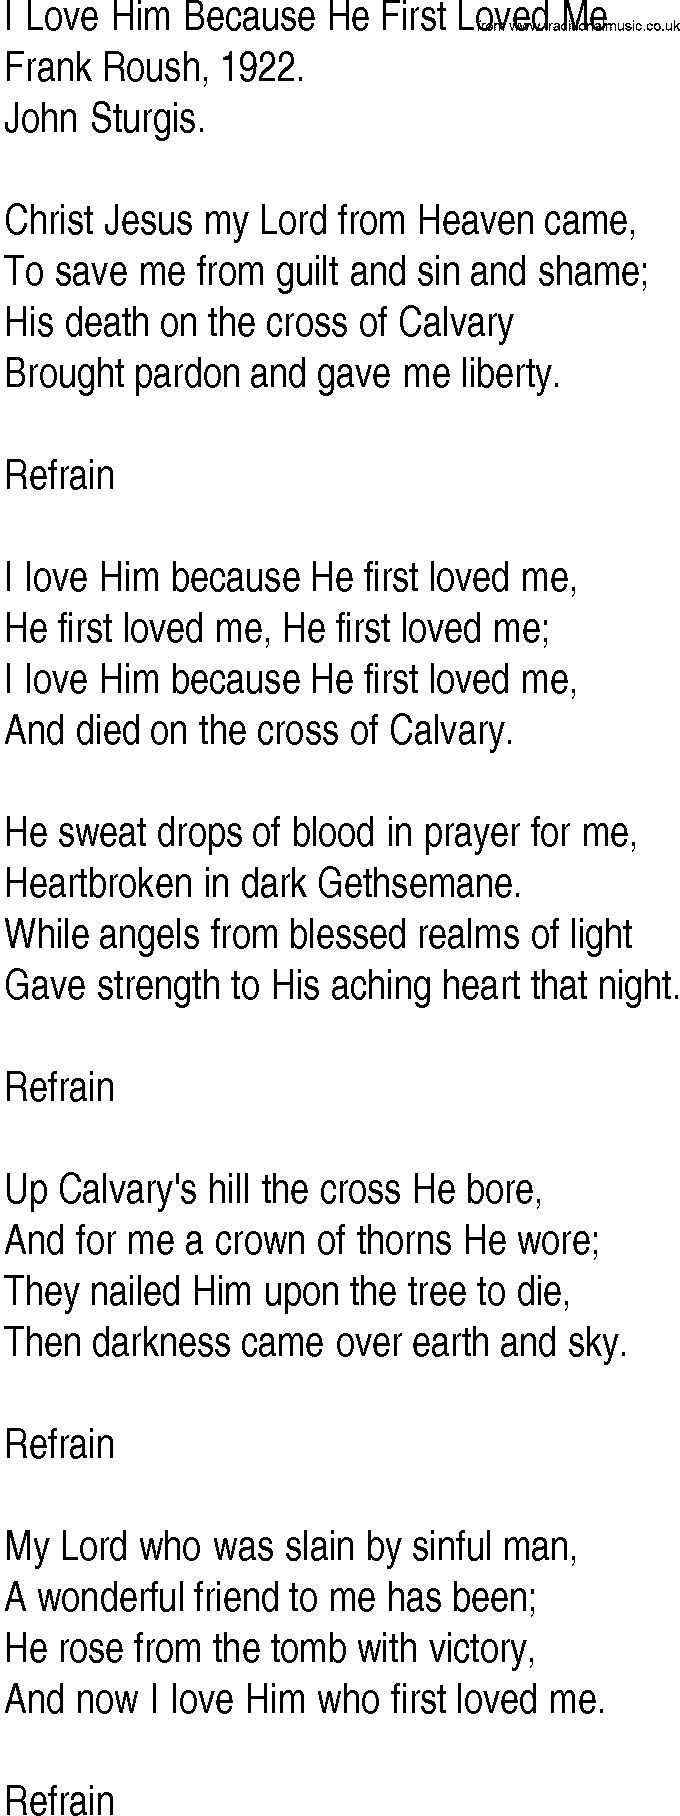 Hymn and Gospel Song: I Love Him Because He First Loved Me by Frank Roush lyrics